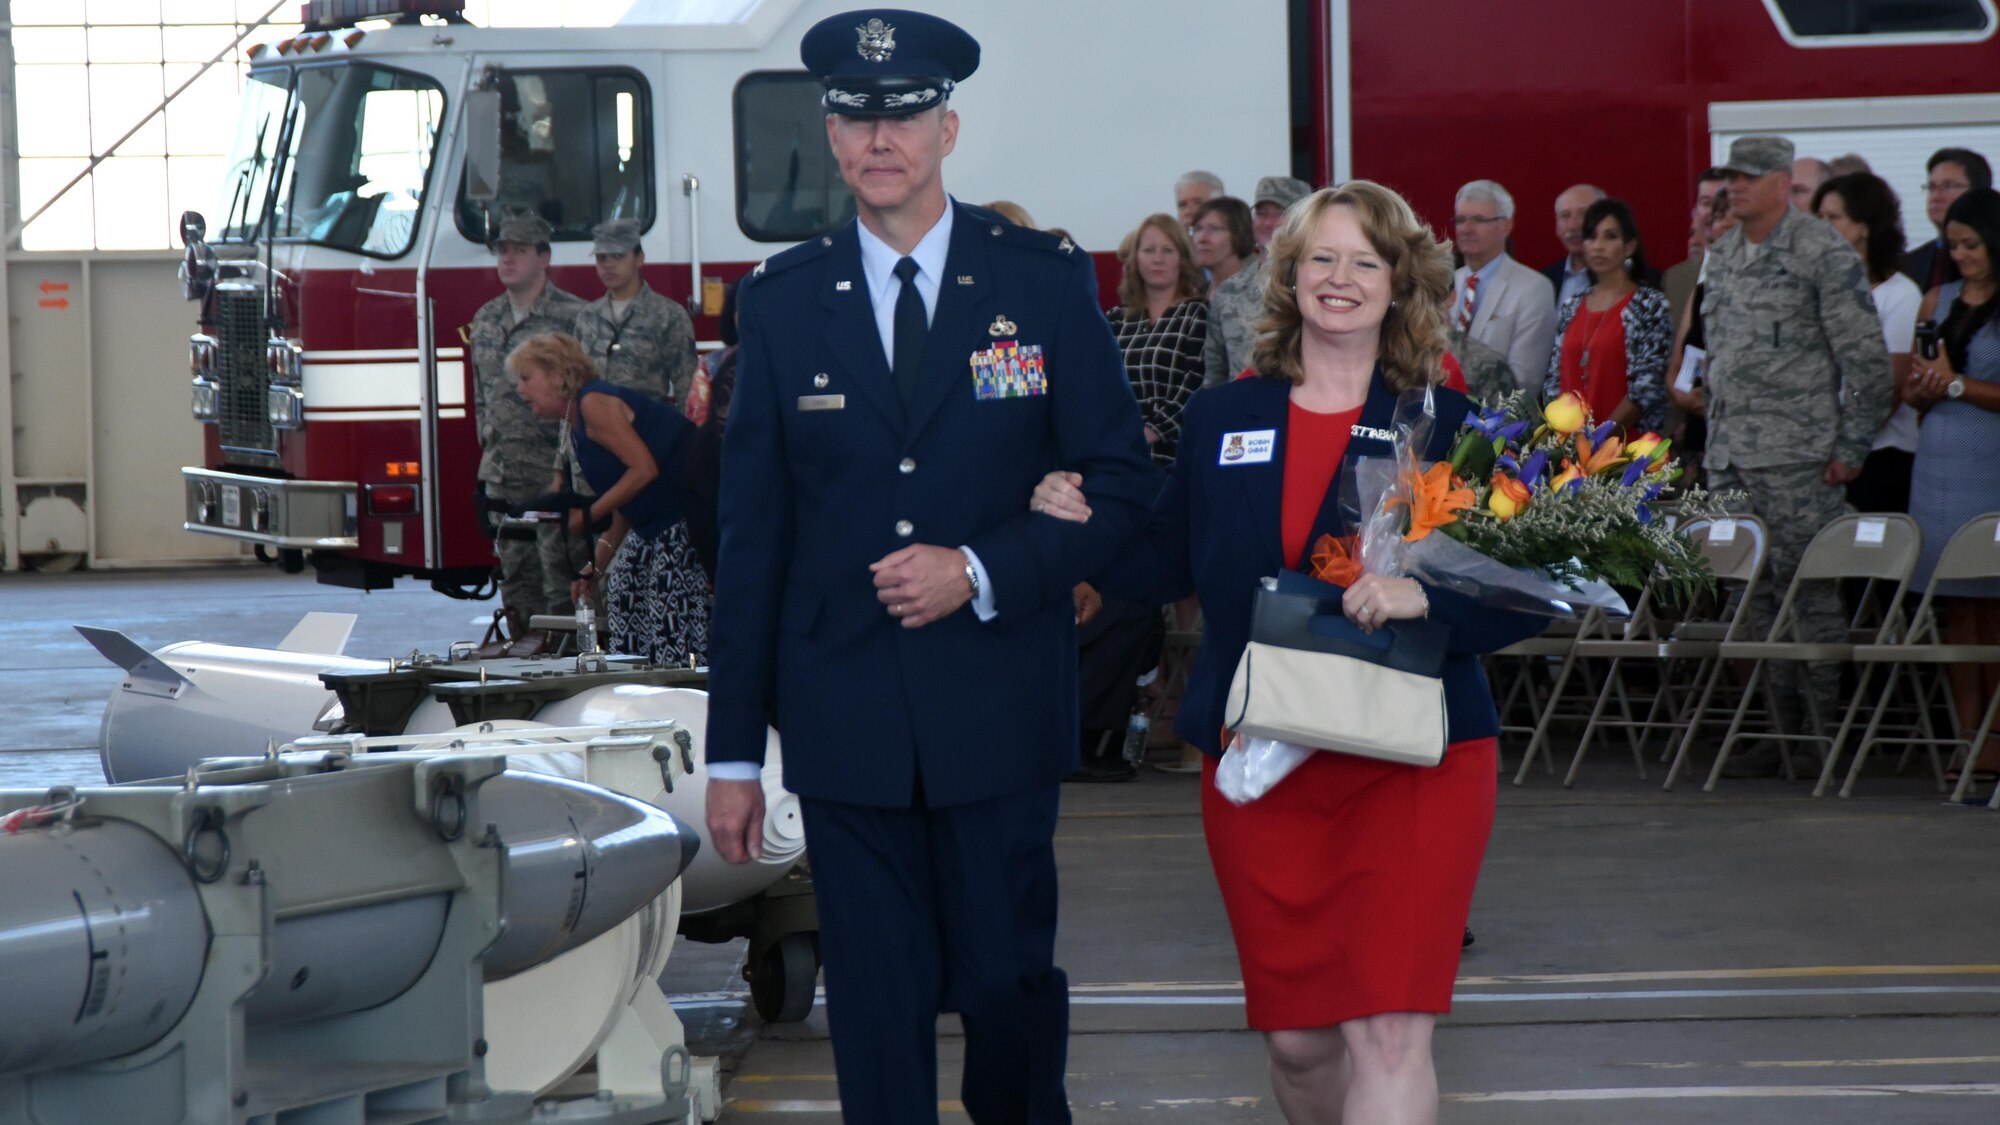 Col Richard W. Gibbs, 377th Air Base Wing commander, escorts his wife, Robin, following a change of command ceremony at Kirtland Air Force Base, New Mexico, June 16. Gibbs takes command of the host unit at Kirtland, which supports over 100 mission partners. (U.S. Air Force photo by Senior Airman Chandler Baker)